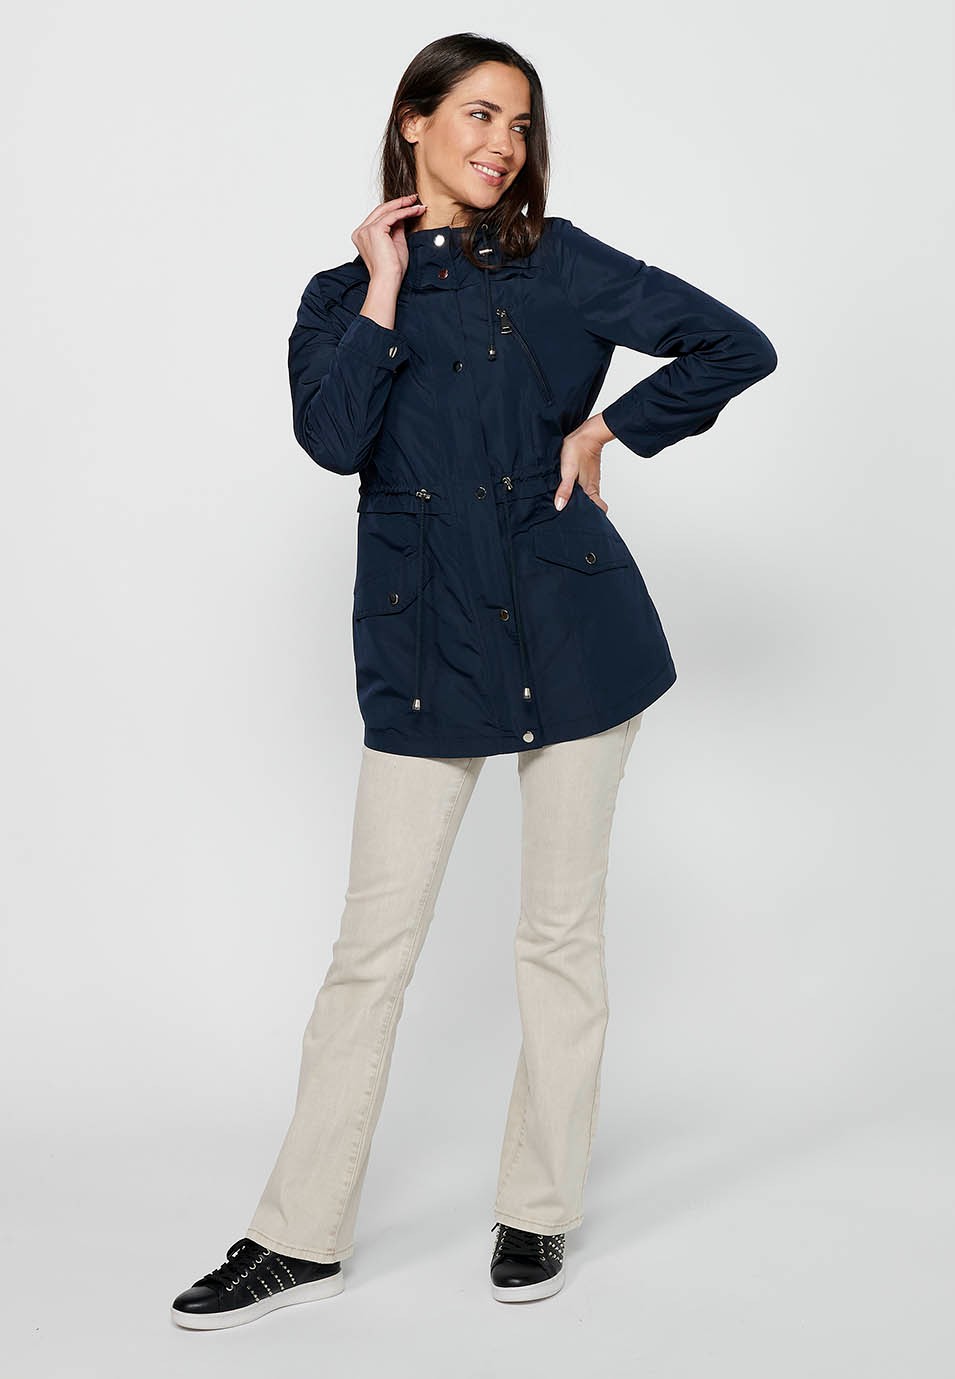 Navy Long Sleeve Parka Jacket with Zipper Front Closure and Hooded Collar with Pockets for Women